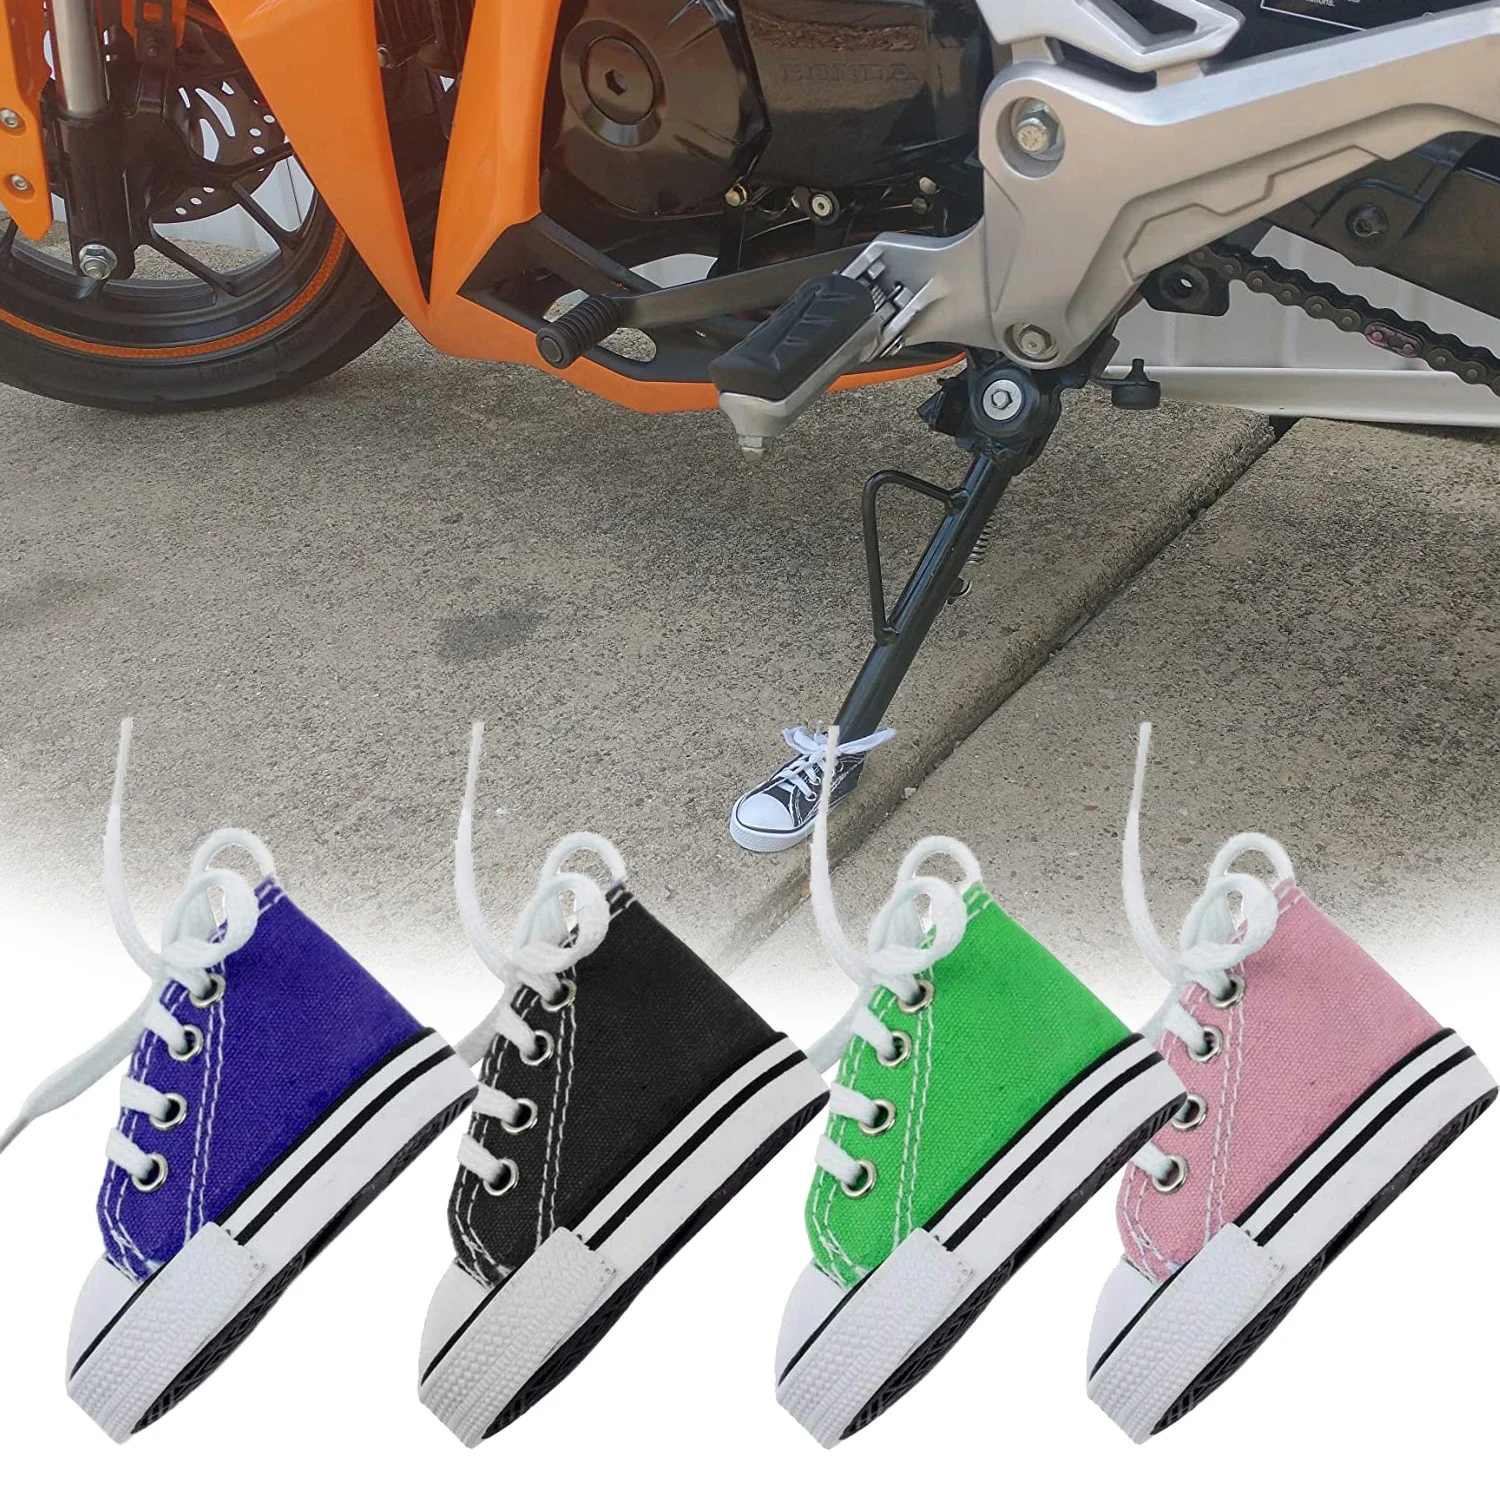 Tand cute mini canvas shoes side stand bicycle kickstand stand pad motorcycle leg brace thumb200